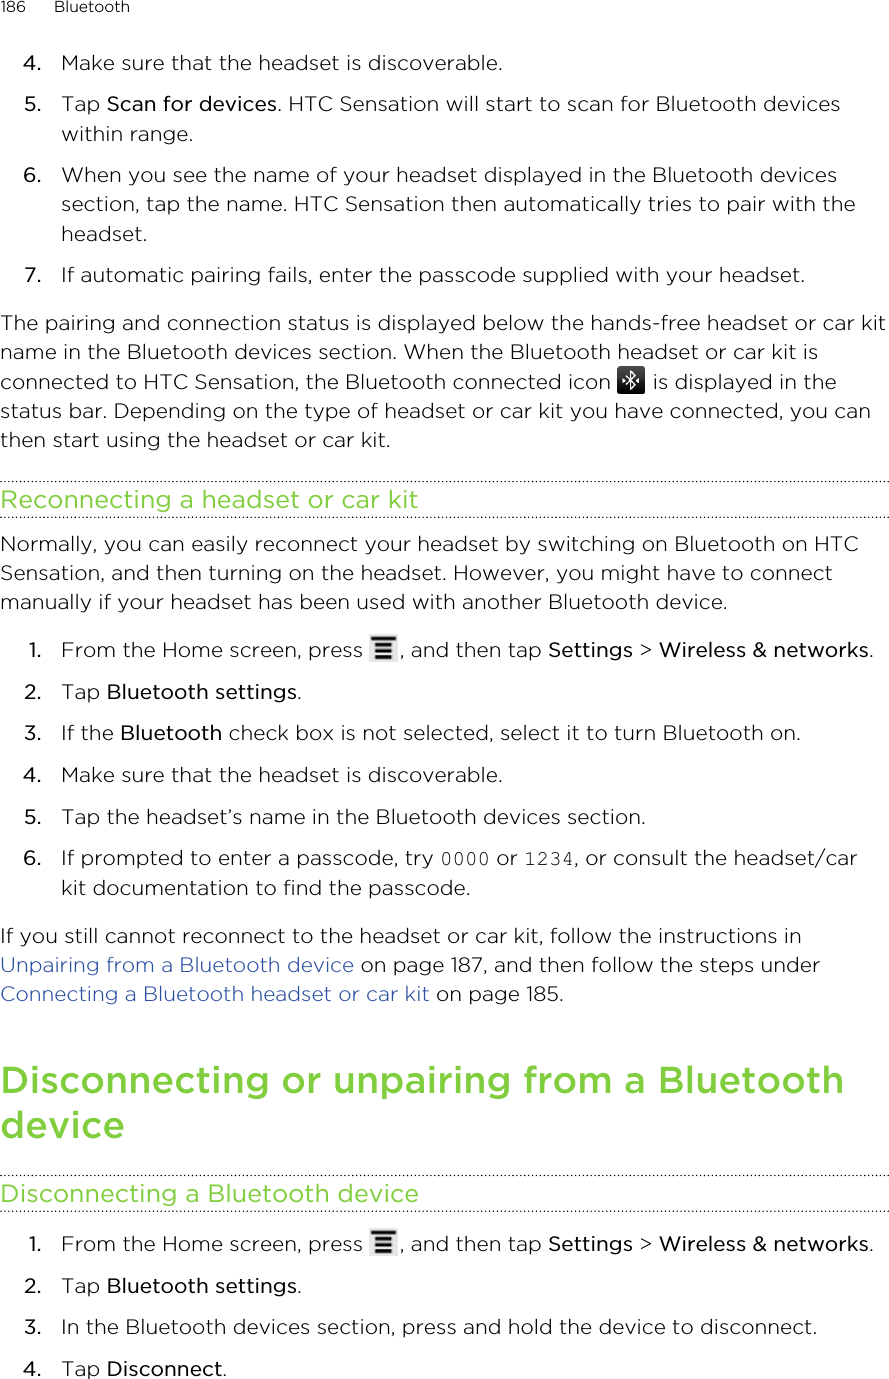 4. Make sure that the headset is discoverable.5. Tap Scan for devices. HTC Sensation will start to scan for Bluetooth deviceswithin range.6. When you see the name of your headset displayed in the Bluetooth devicessection, tap the name. HTC Sensation then automatically tries to pair with theheadset.7. If automatic pairing fails, enter the passcode supplied with your headset.The pairing and connection status is displayed below the hands-free headset or car kitname in the Bluetooth devices section. When the Bluetooth headset or car kit isconnected to HTC Sensation, the Bluetooth connected icon   is displayed in thestatus bar. Depending on the type of headset or car kit you have connected, you canthen start using the headset or car kit.Reconnecting a headset or car kitNormally, you can easily reconnect your headset by switching on Bluetooth on HTCSensation, and then turning on the headset. However, you might have to connectmanually if your headset has been used with another Bluetooth device.1. From the Home screen, press  , and then tap Settings &gt; Wireless &amp; networks.2. Tap Bluetooth settings.3. If the Bluetooth check box is not selected, select it to turn Bluetooth on.4. Make sure that the headset is discoverable.5. Tap the headset’s name in the Bluetooth devices section.6. If prompted to enter a passcode, try 0000 or 1234, or consult the headset/carkit documentation to find the passcode.If you still cannot reconnect to the headset or car kit, follow the instructions in Unpairing from a Bluetooth device on page 187, and then follow the steps under Connecting a Bluetooth headset or car kit on page 185.Disconnecting or unpairing from a BluetoothdeviceDisconnecting a Bluetooth device1. From the Home screen, press  , and then tap Settings &gt; Wireless &amp; networks.2. Tap Bluetooth settings.3. In the Bluetooth devices section, press and hold the device to disconnect.4. Tap Disconnect.186 Bluetooth